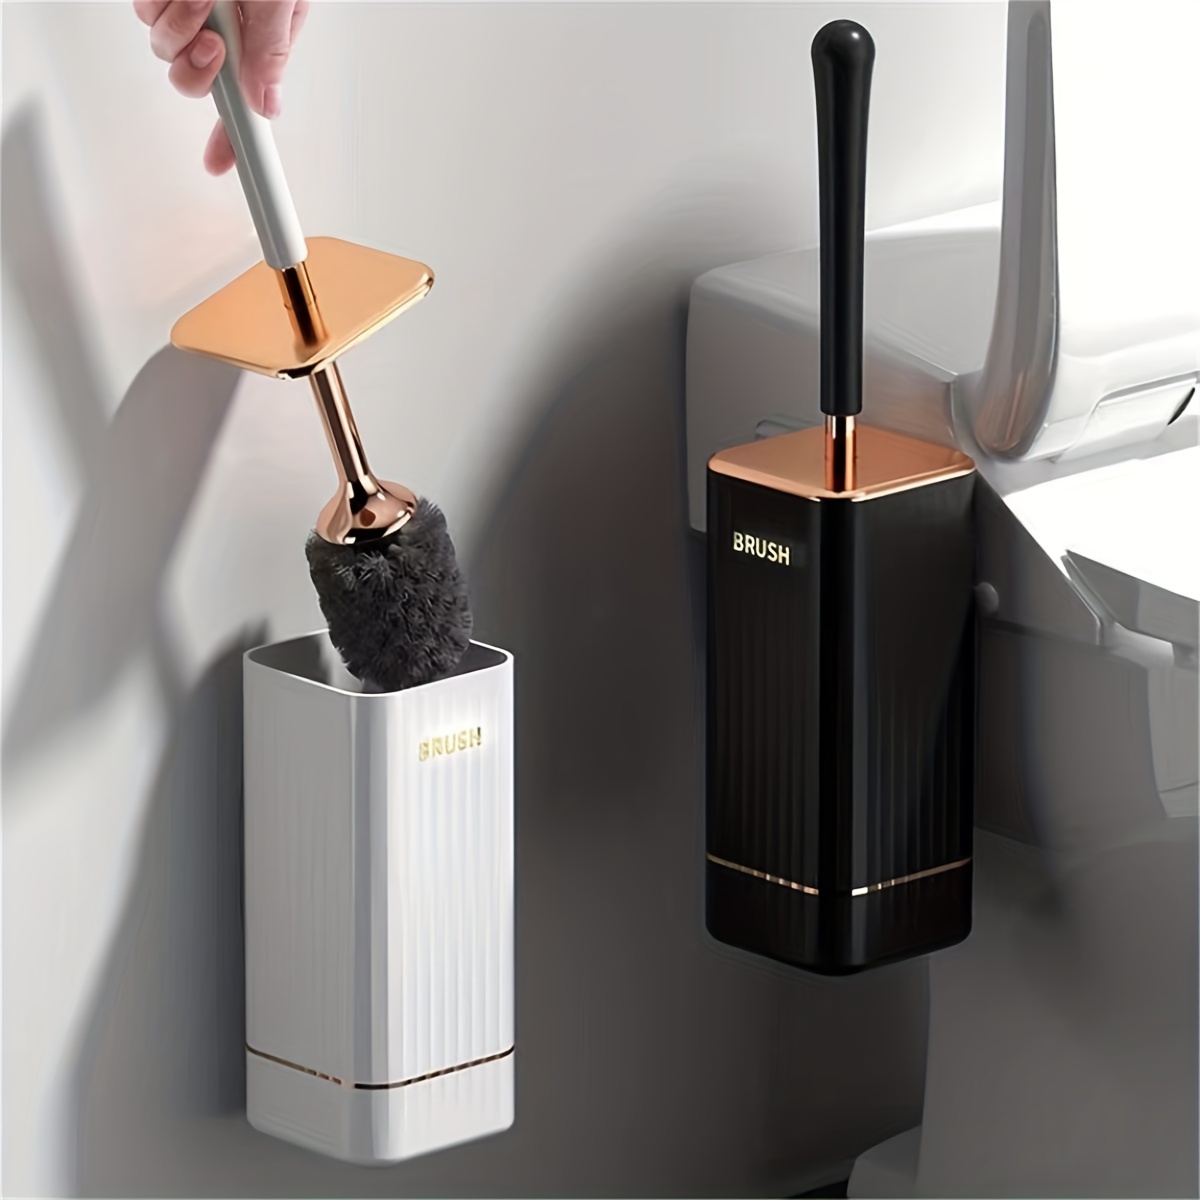 1pc Wall-mounted S-shaped Toilet Brush With Holder For Bathroom